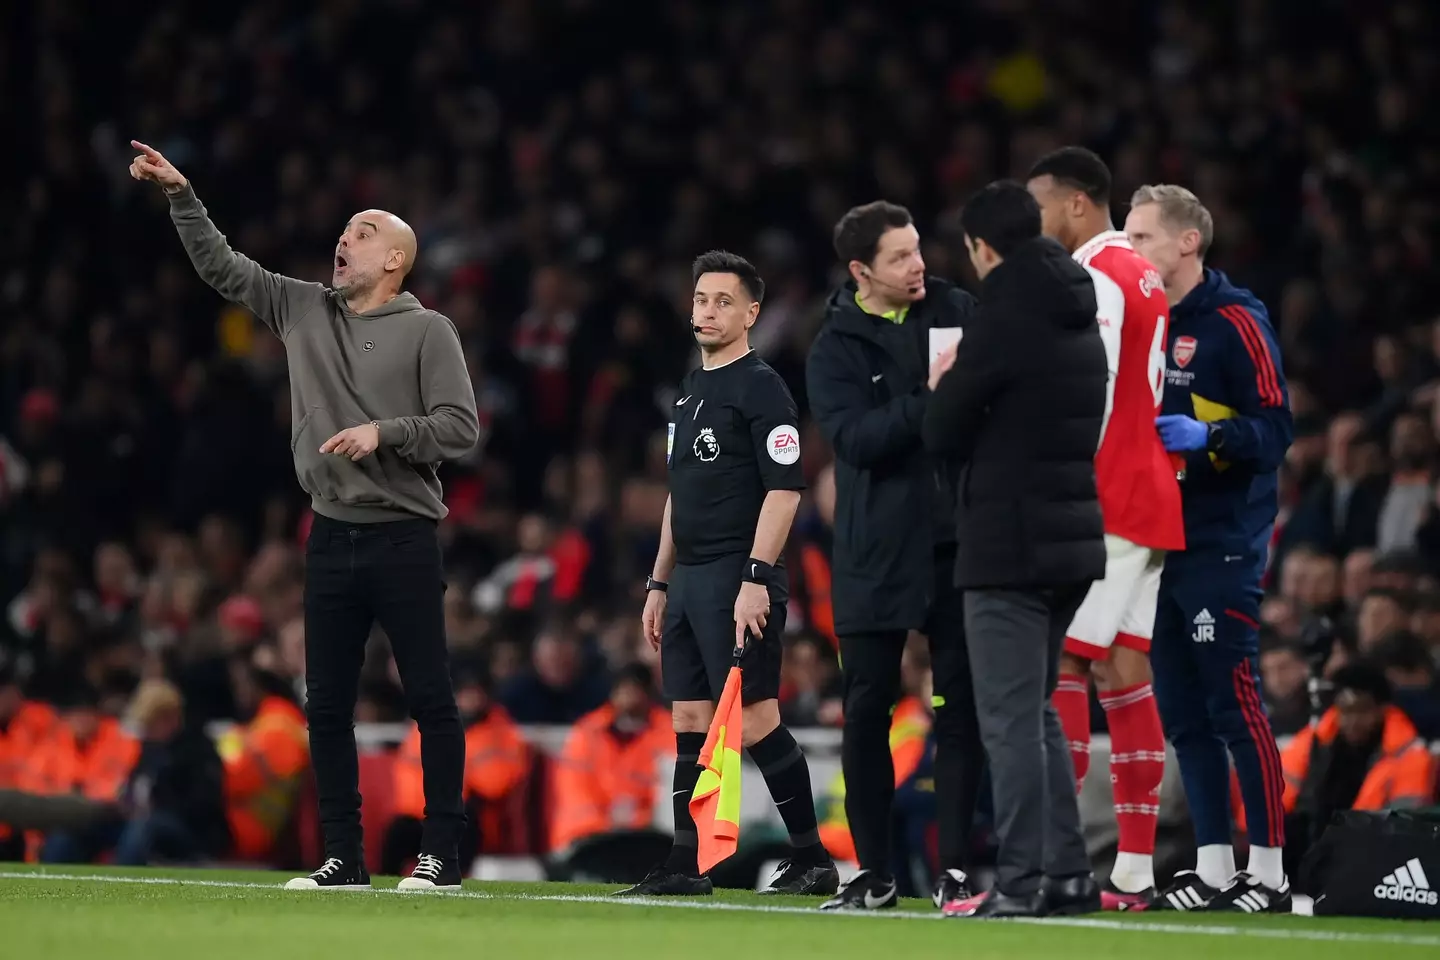 Pep Guardiola and Mikel Arteta on the touchline for Arsenal vs Manchester City last season. Image: Getty